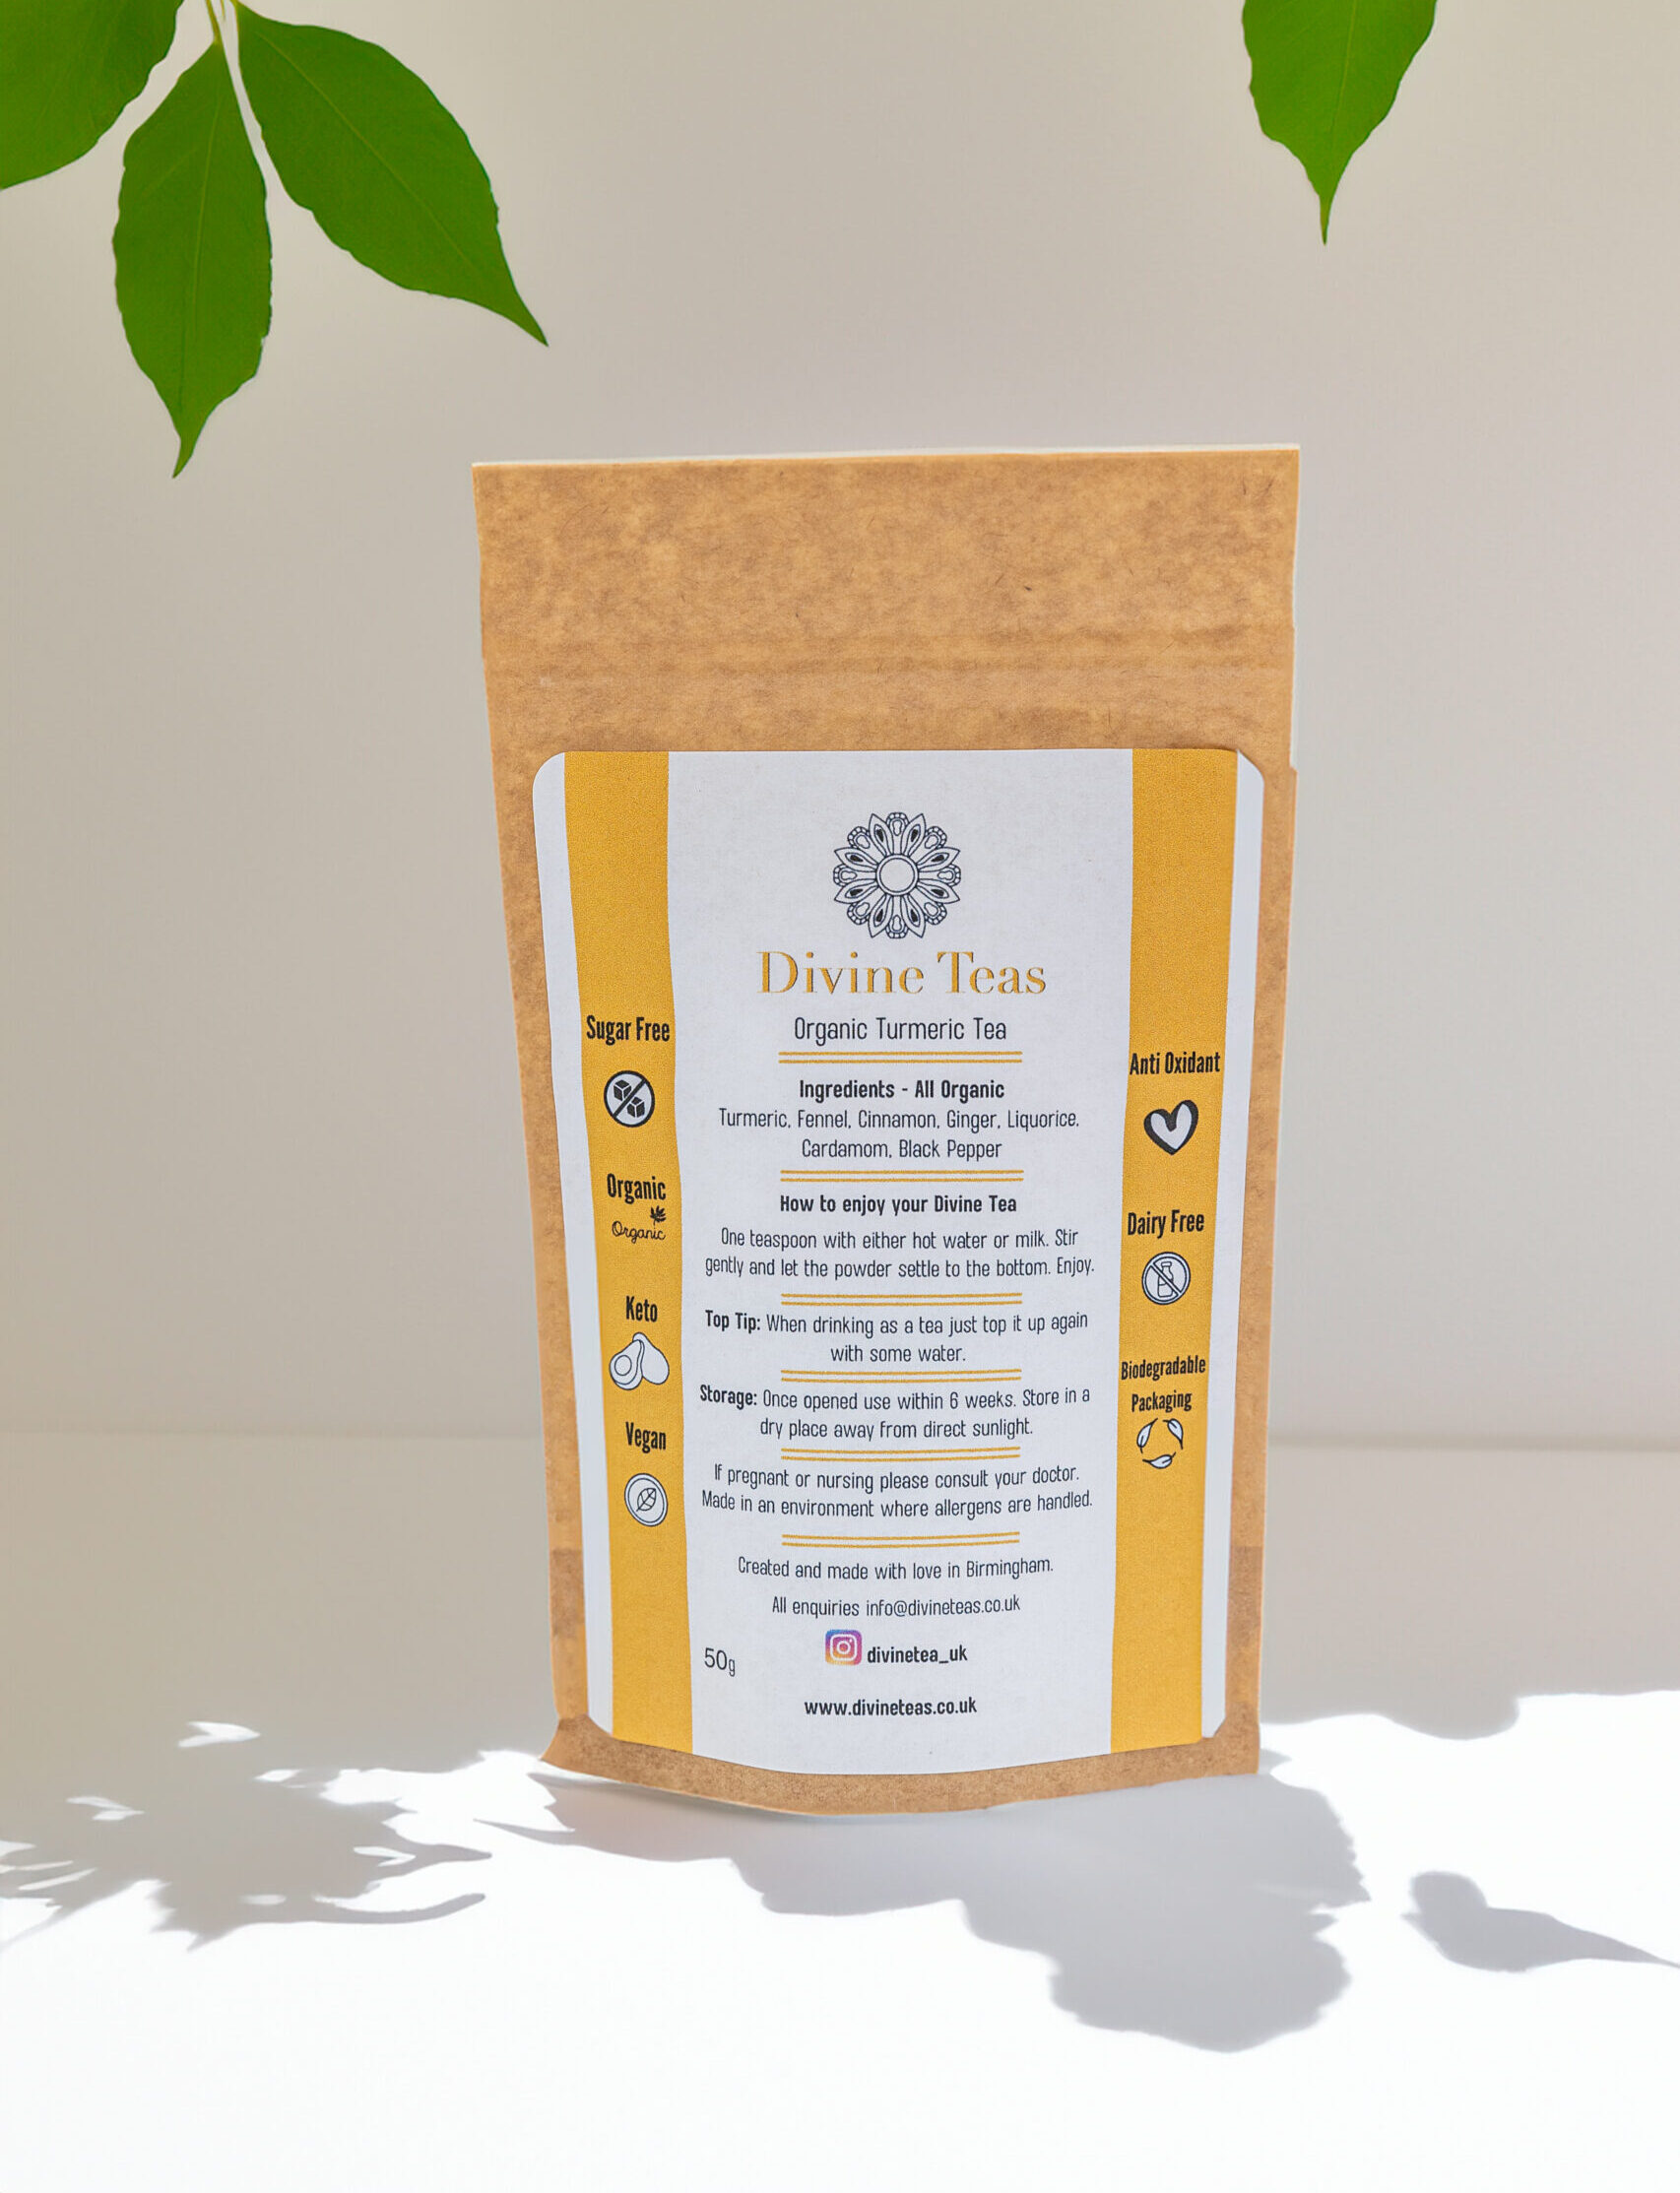 Organic turmeric tea 50g pouch – Monthly Subscription